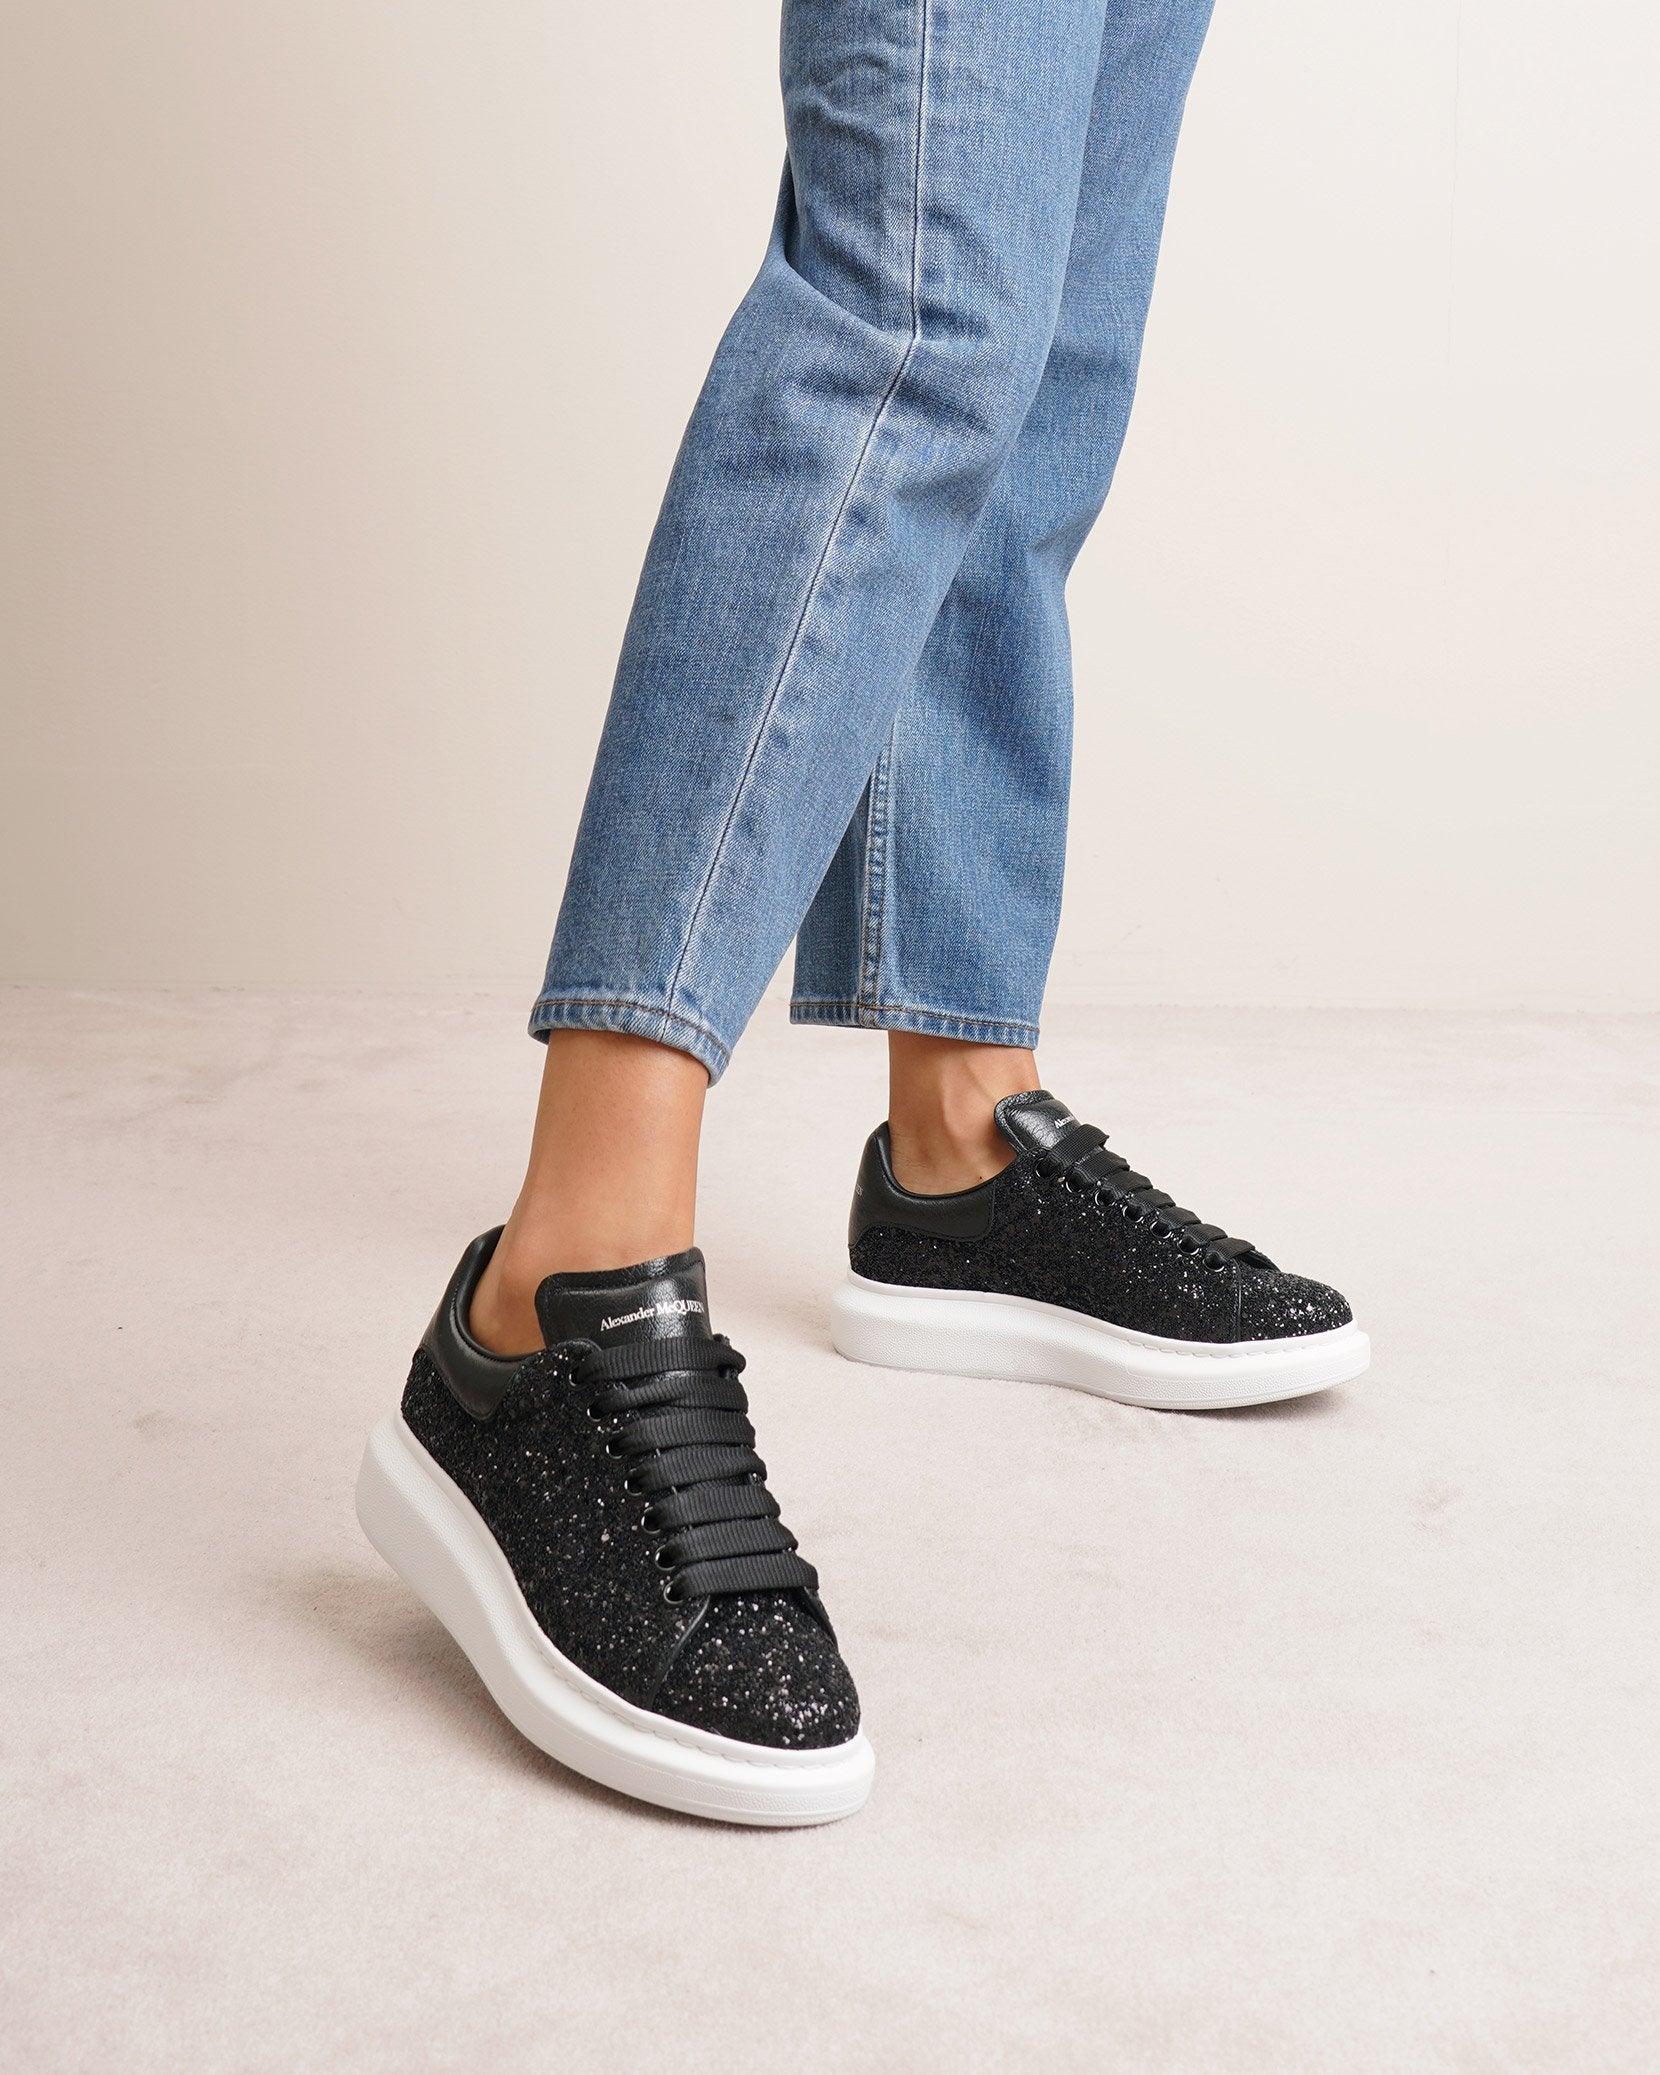 Alexander McQueen Leather Oversized Black Glitter Trainers - Save 50% - Lyst